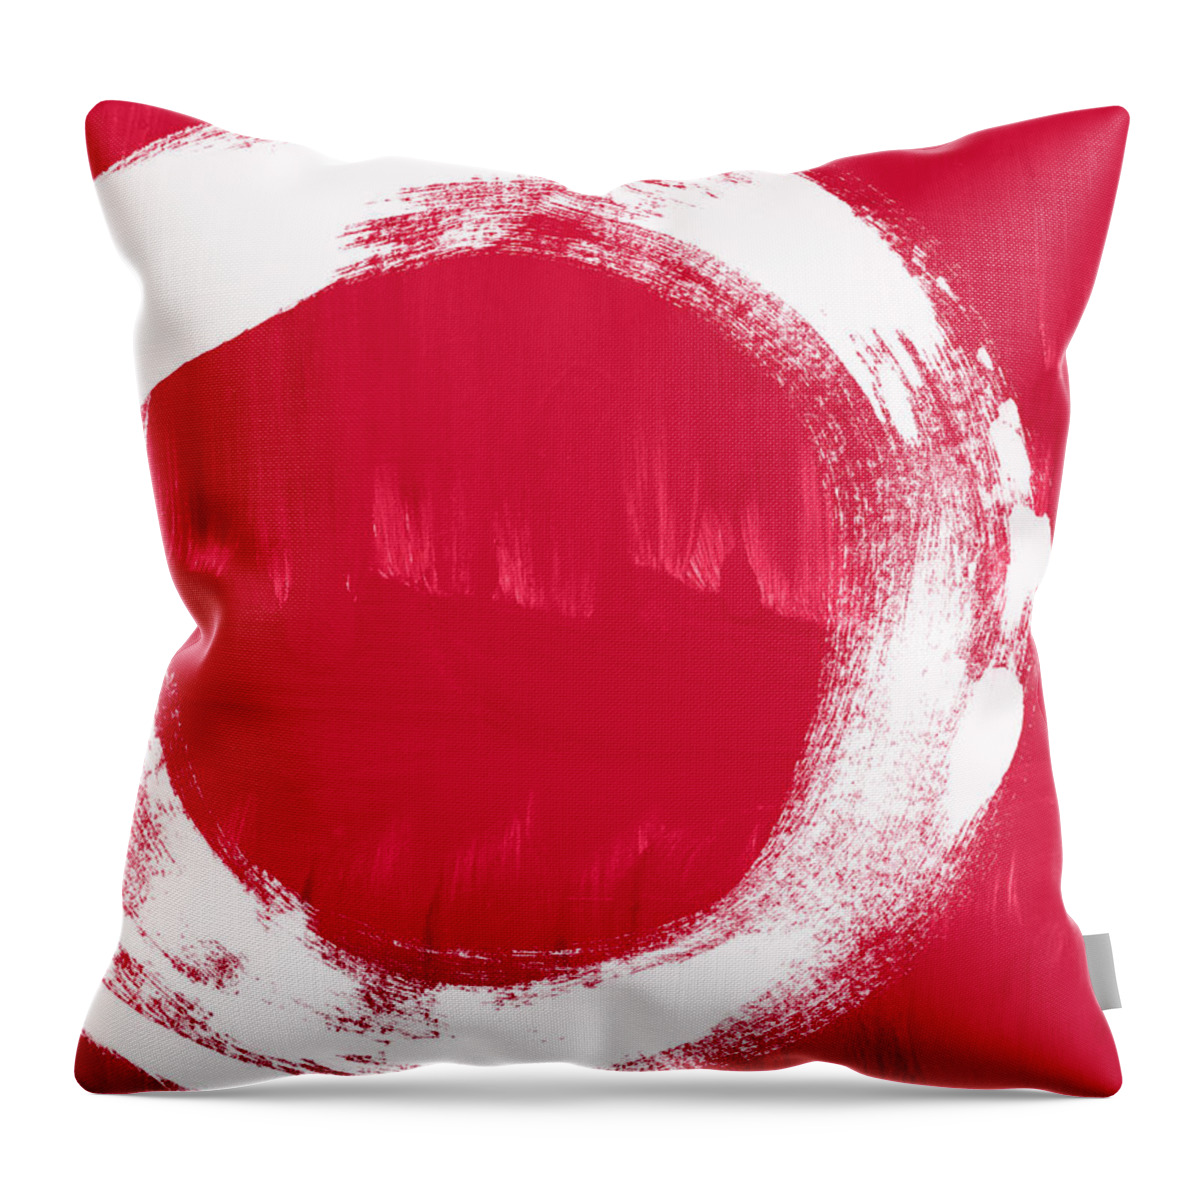 Red Throw Pillow featuring the painting Energy by Linda Woods